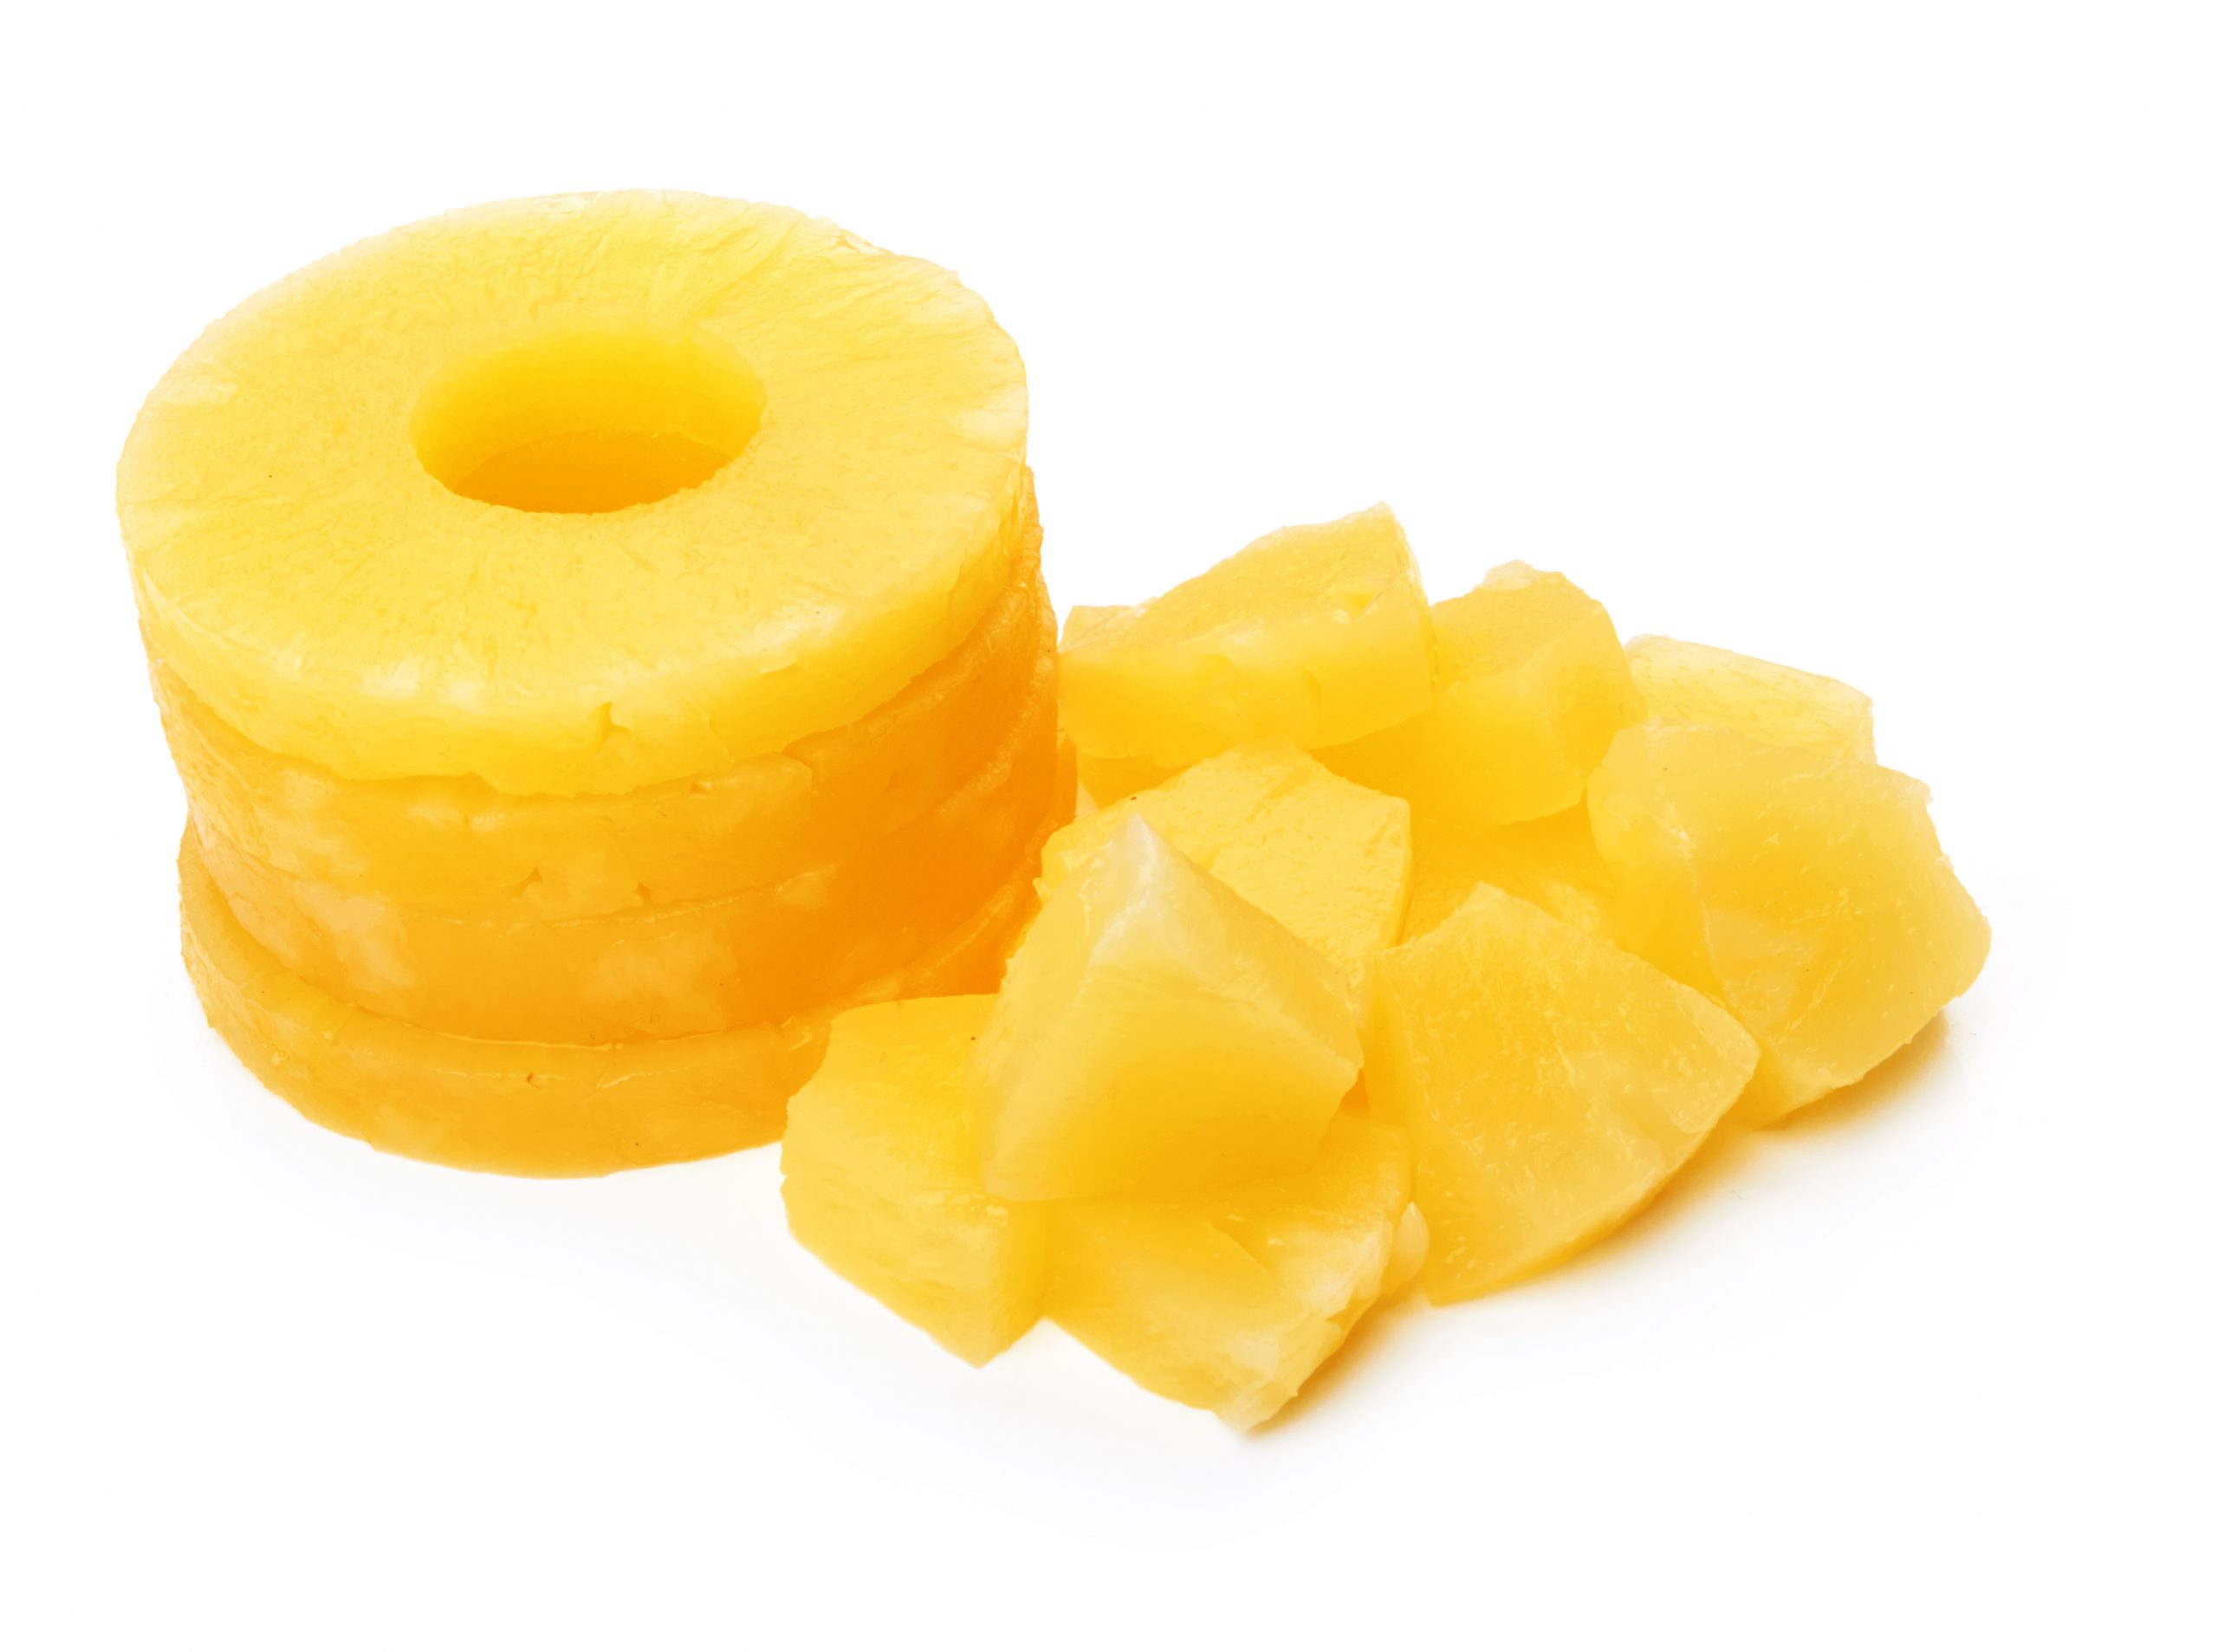 chunks of canned pineapple on white background